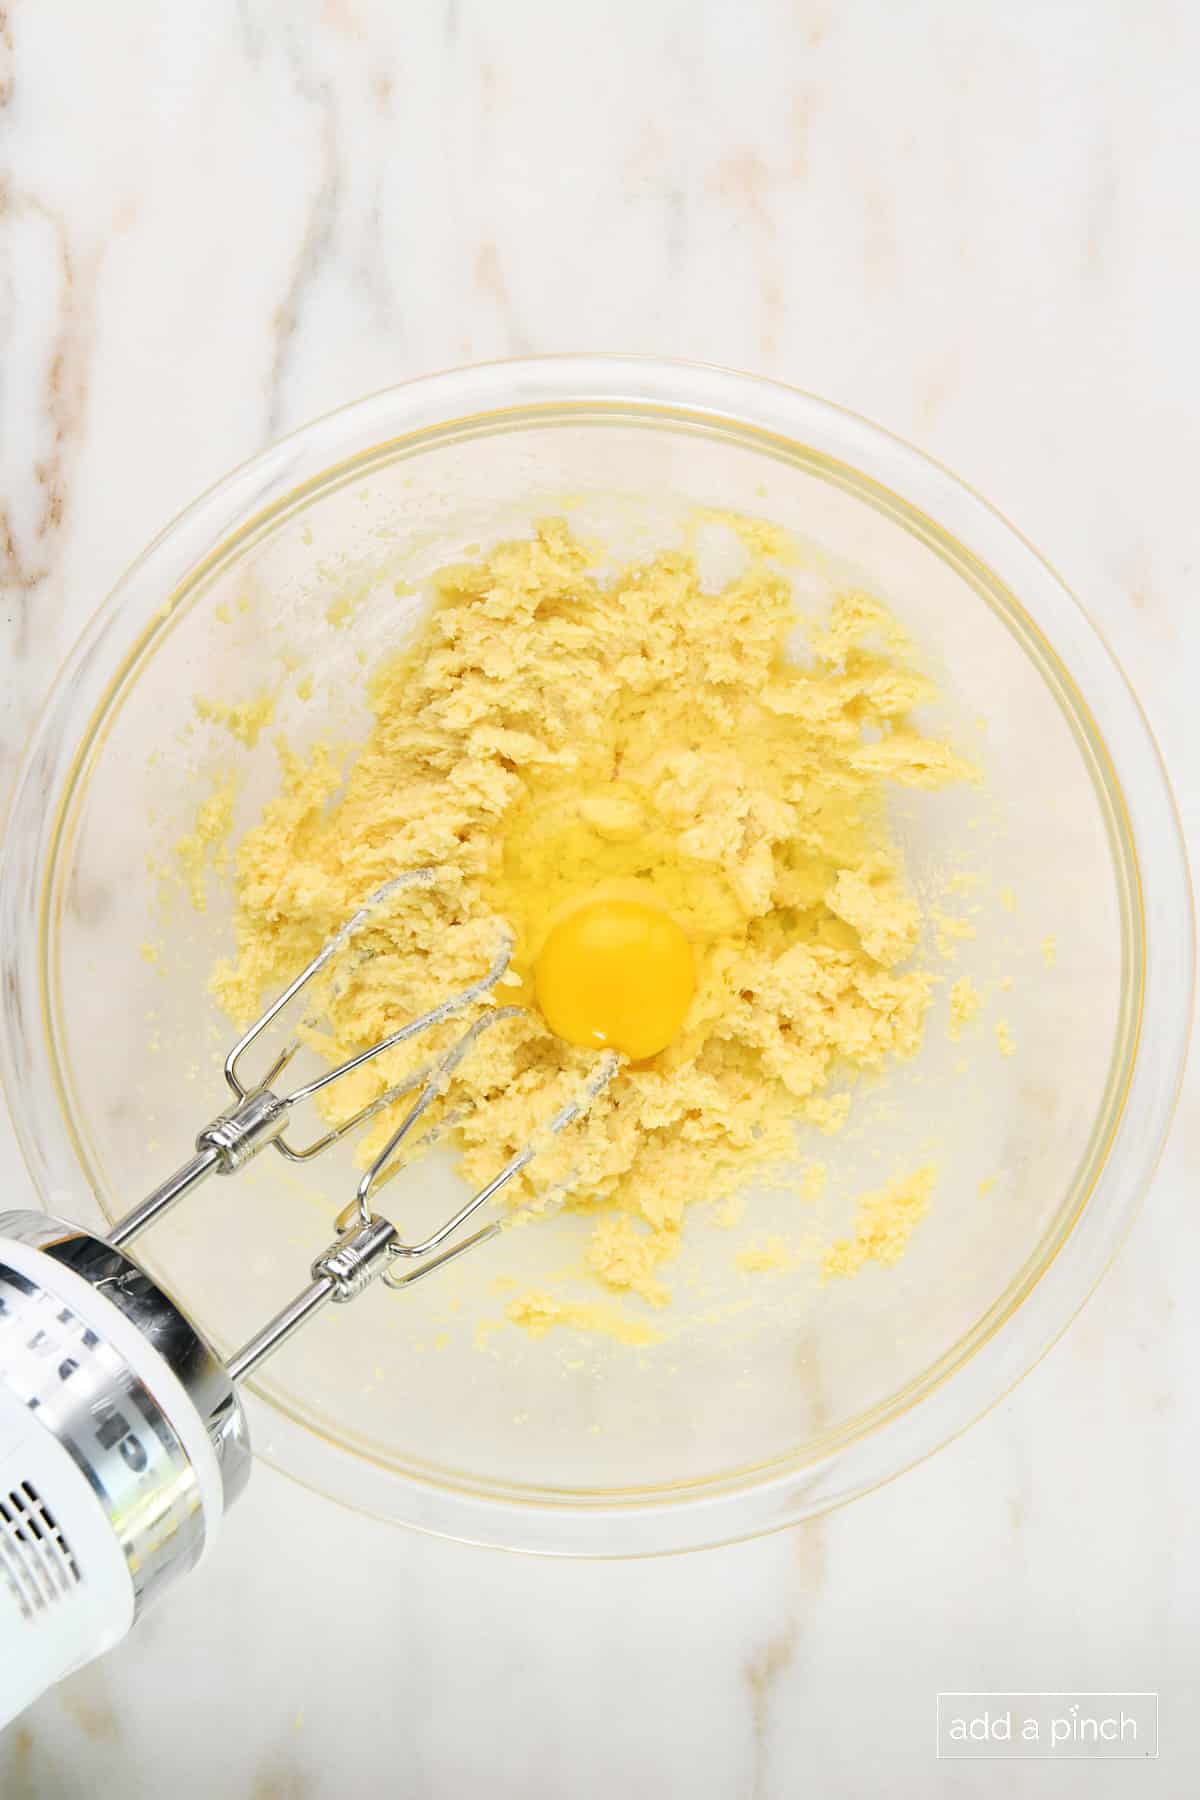 Egg added to butter and sugar mixture in a glass mixing bowl.